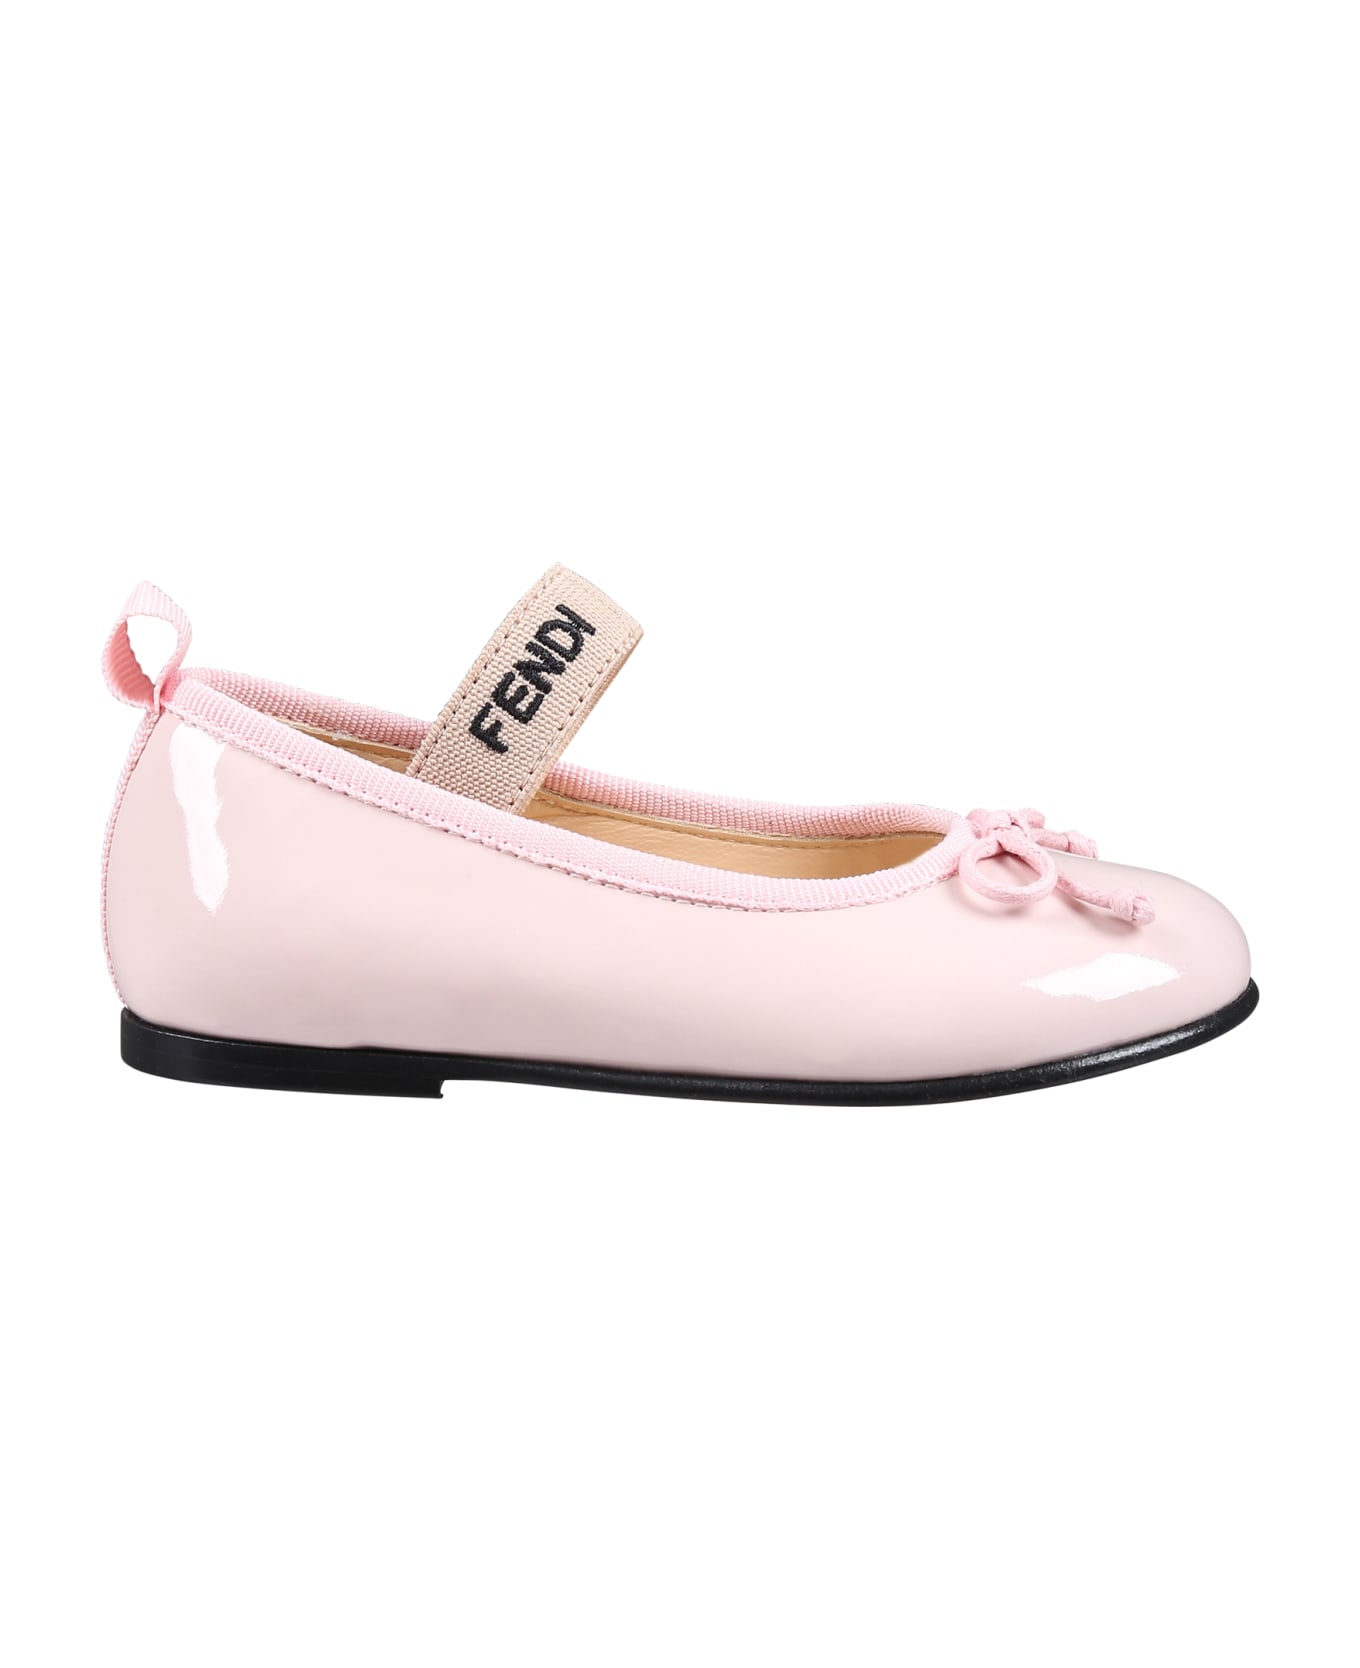 Fendi Pink Ballet Flat For Baby Girl With Logo - Pink